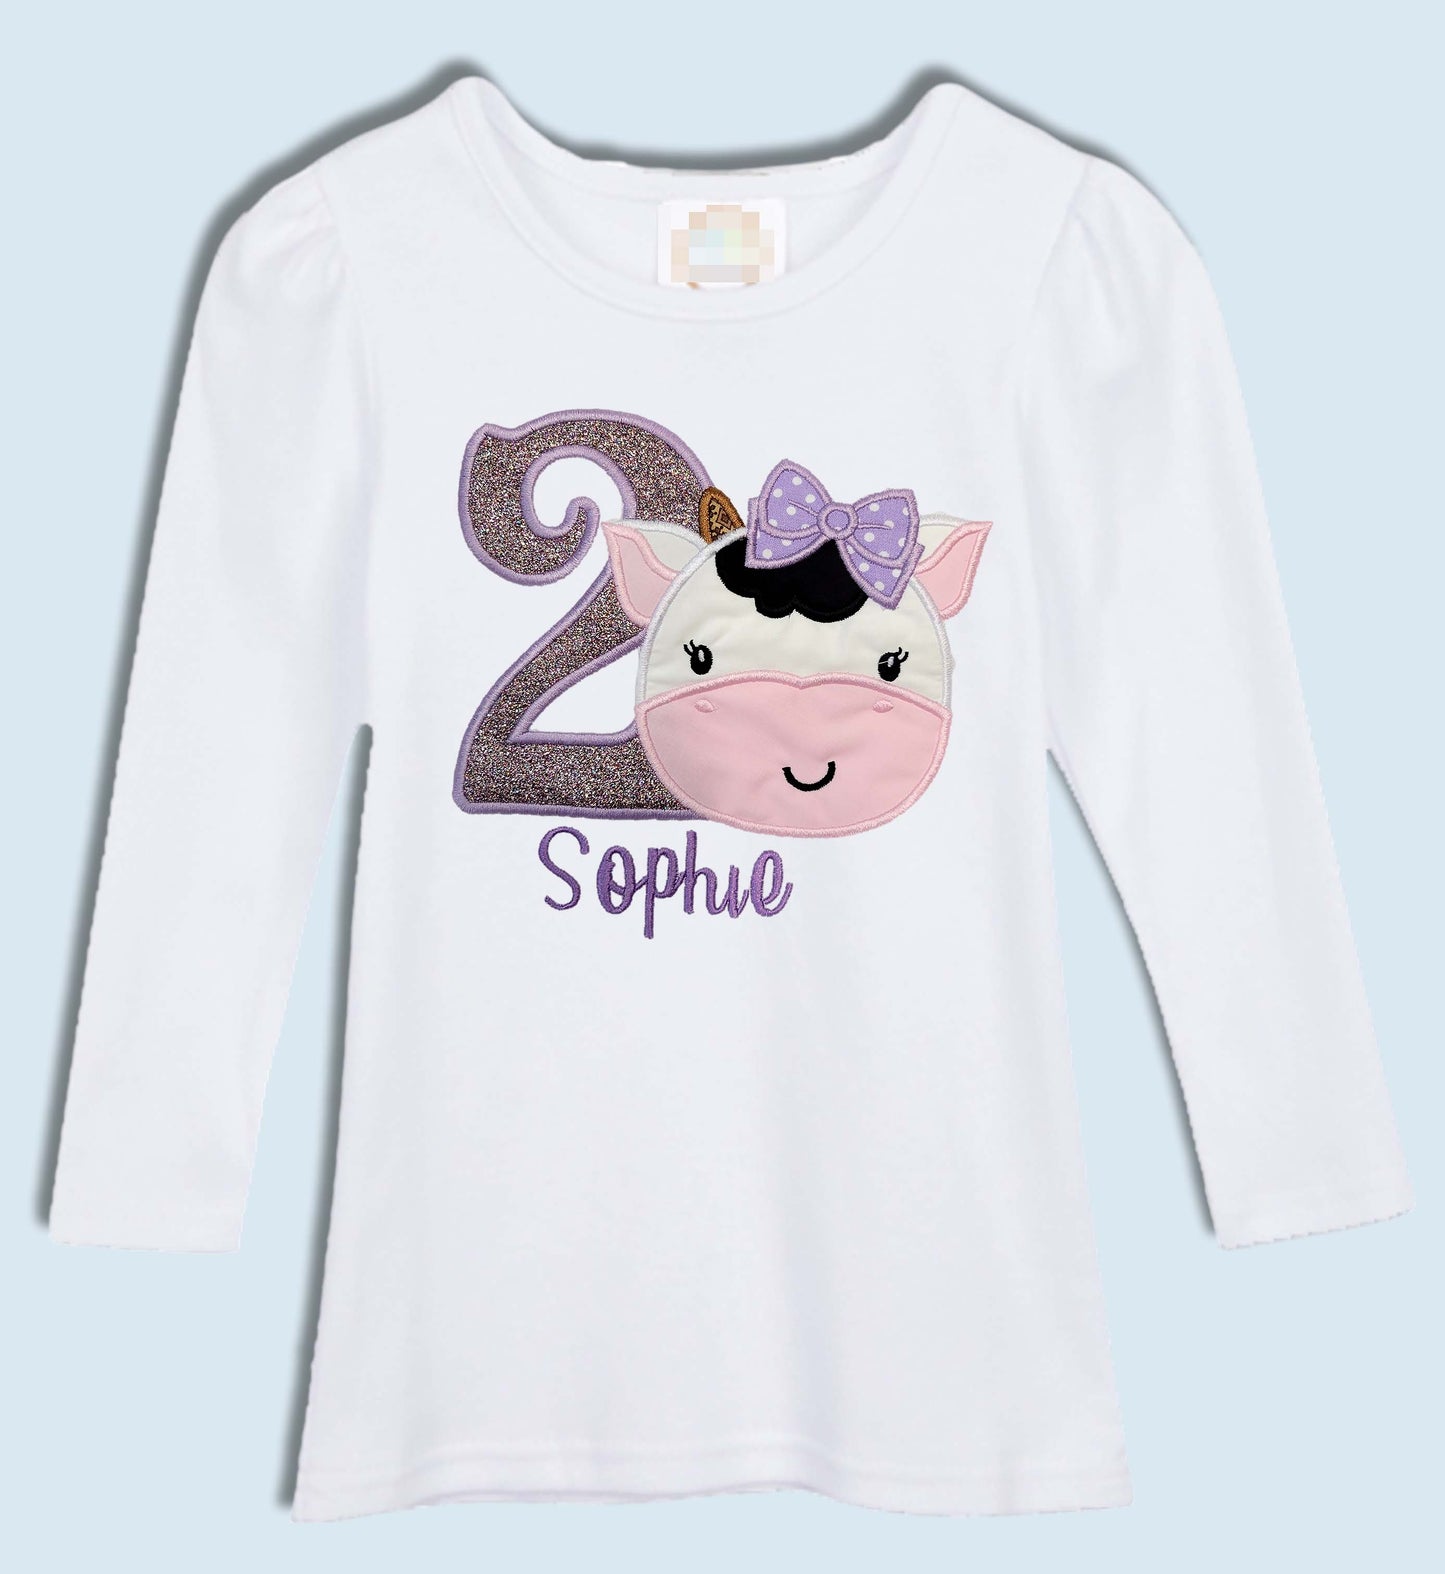 Personalized Birthday Shirt embroidered cow  long sleeve shirt 